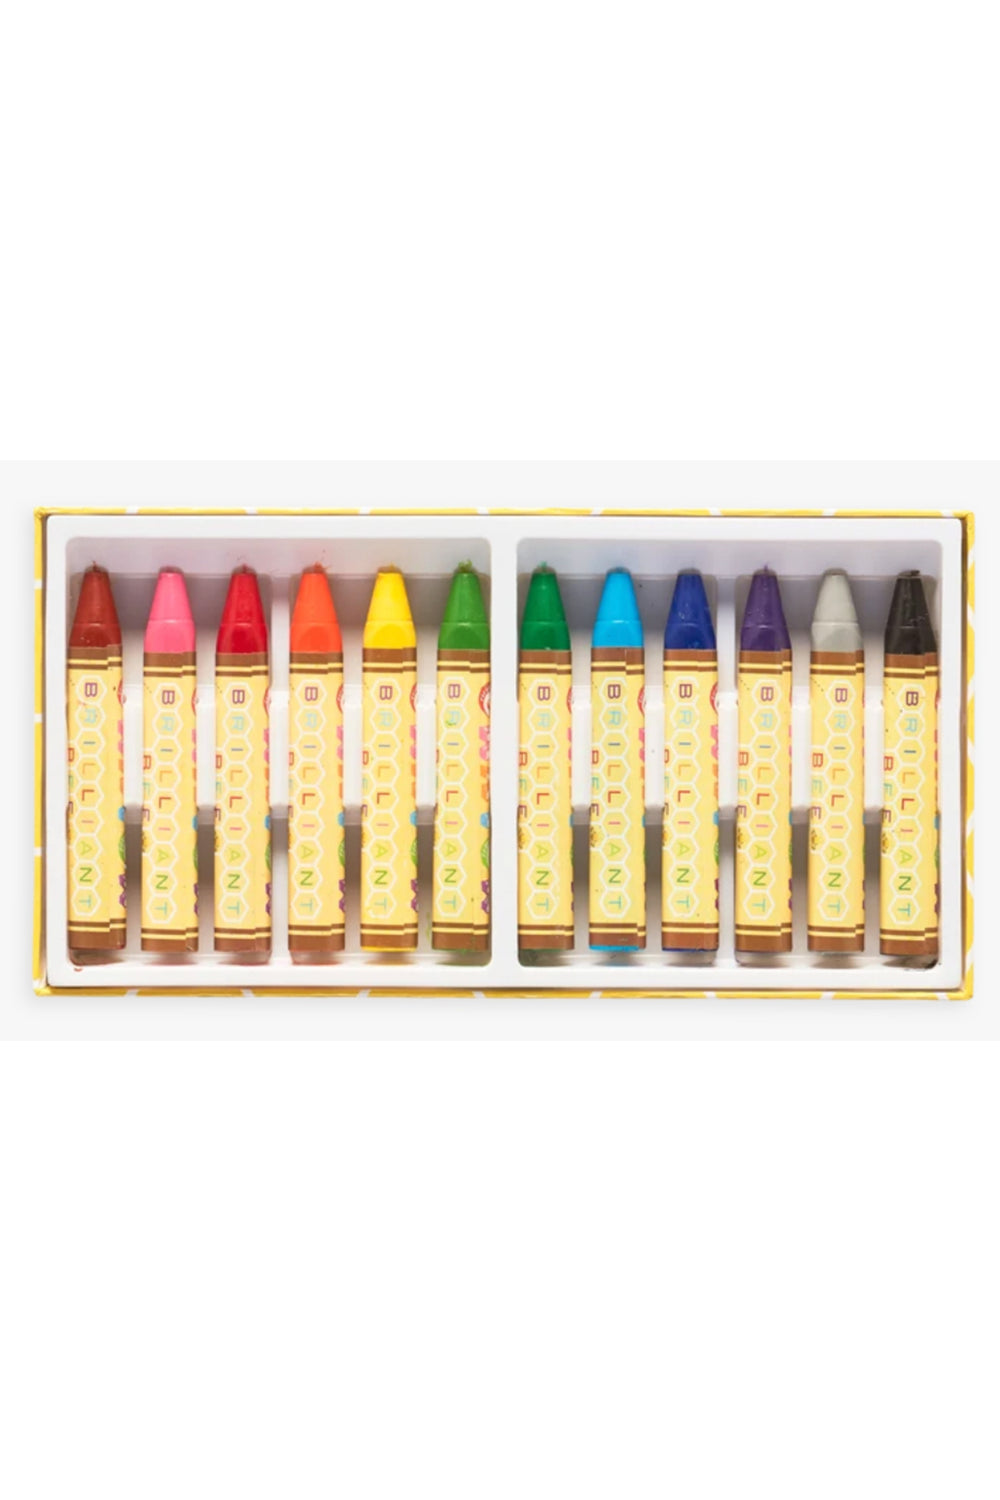 STACK OF STARS STACKING CRAYON BY OOLY – Bonjour Fête